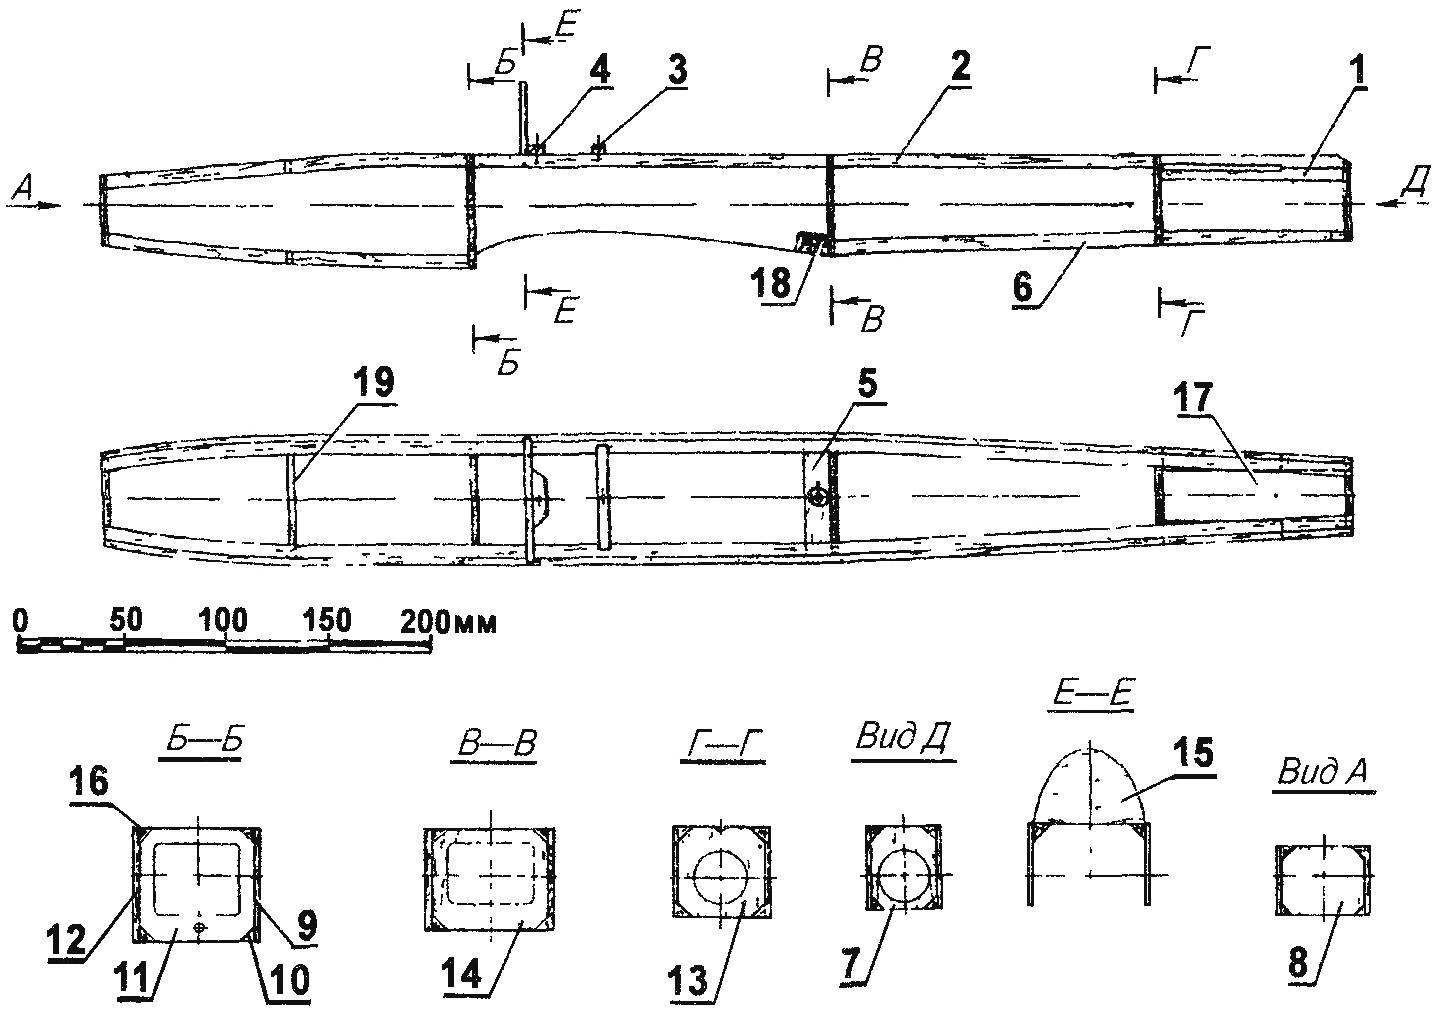 The layout of the skeleton of the fuselage